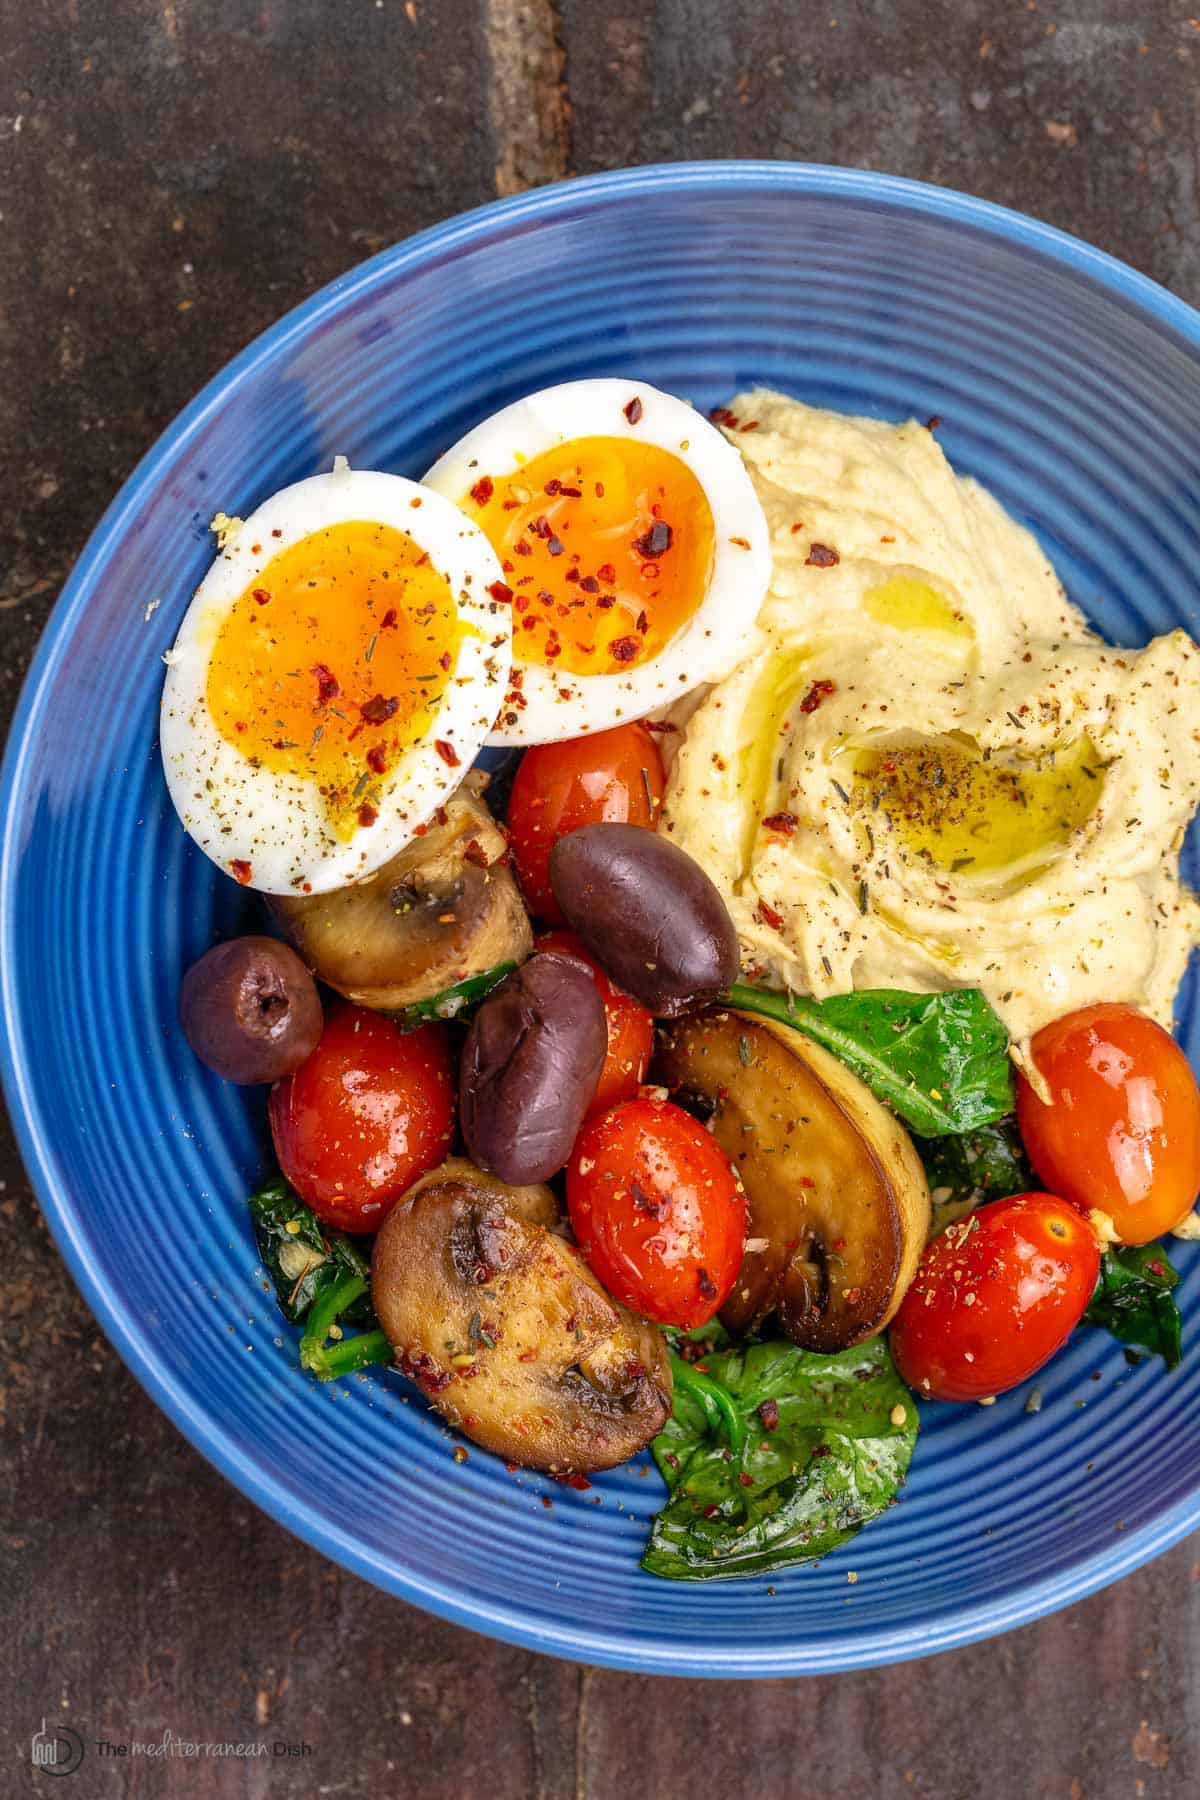 A Mediterranean breakfast bowl with a soft-boiled egg, hummus and sauteed vegetables on a blue plate.